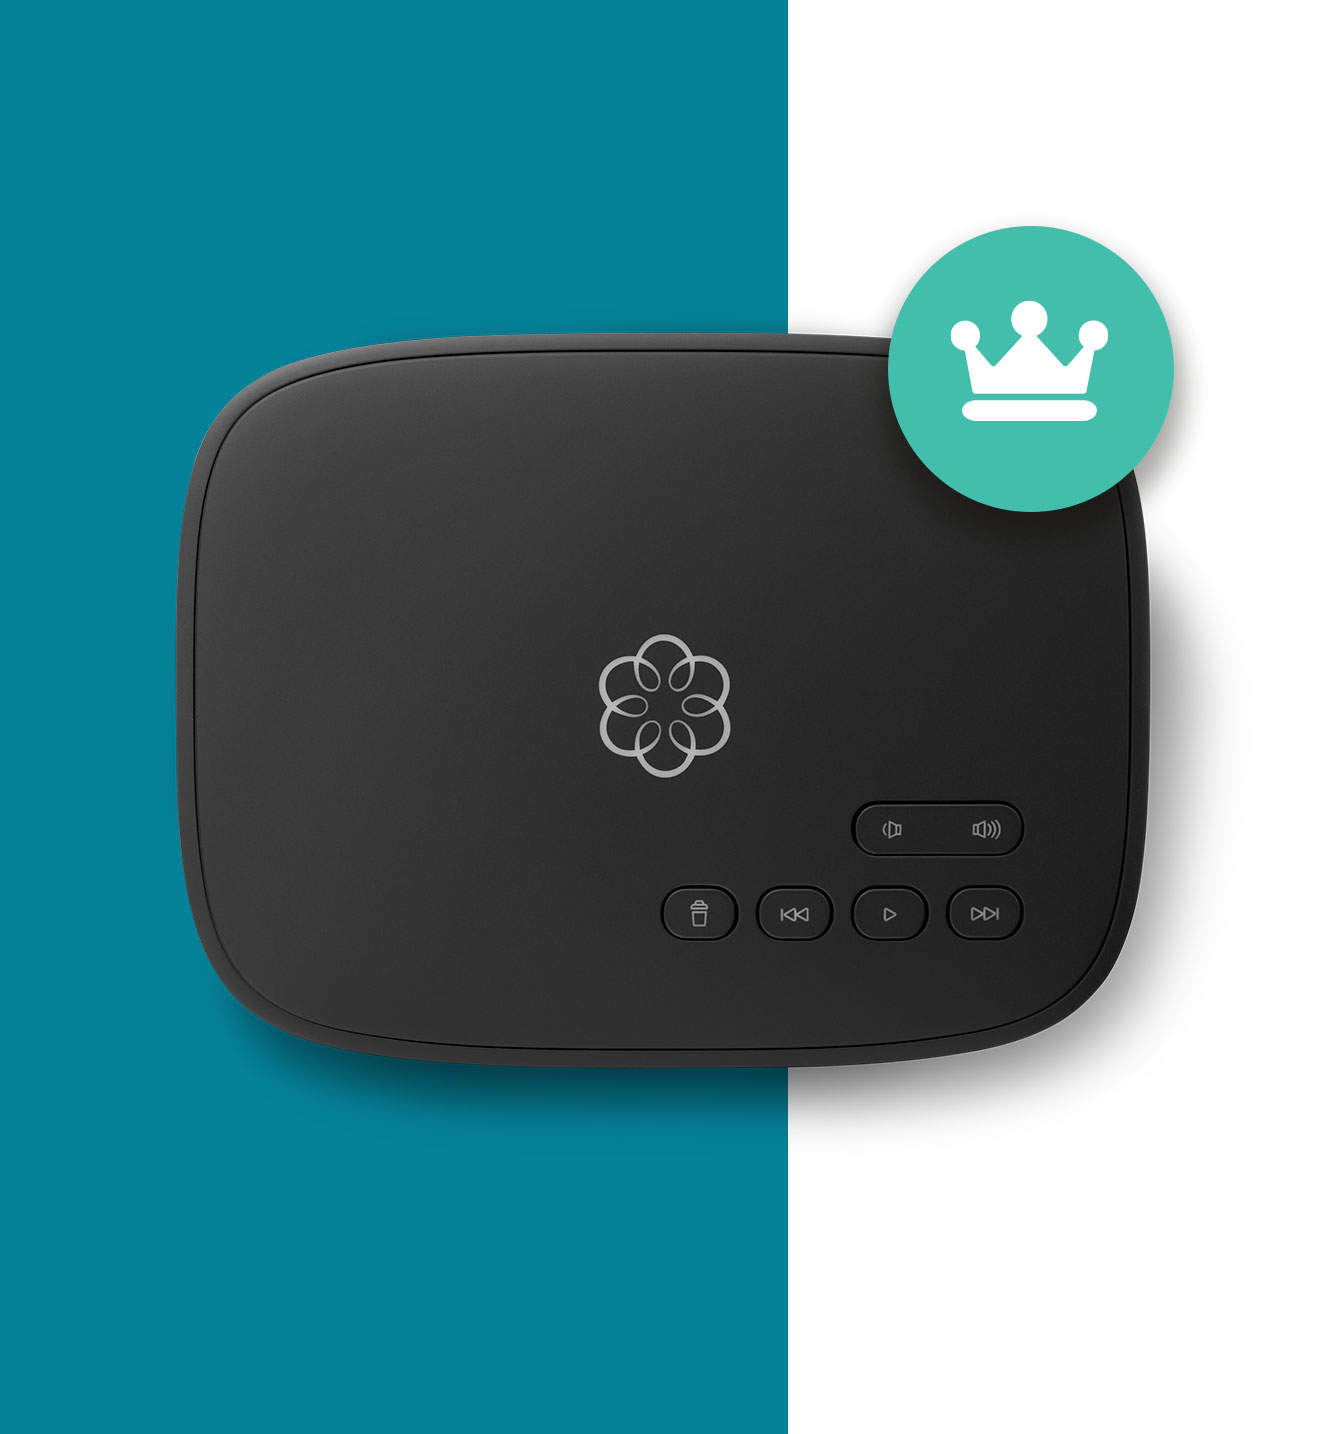 Ooma Premier device.